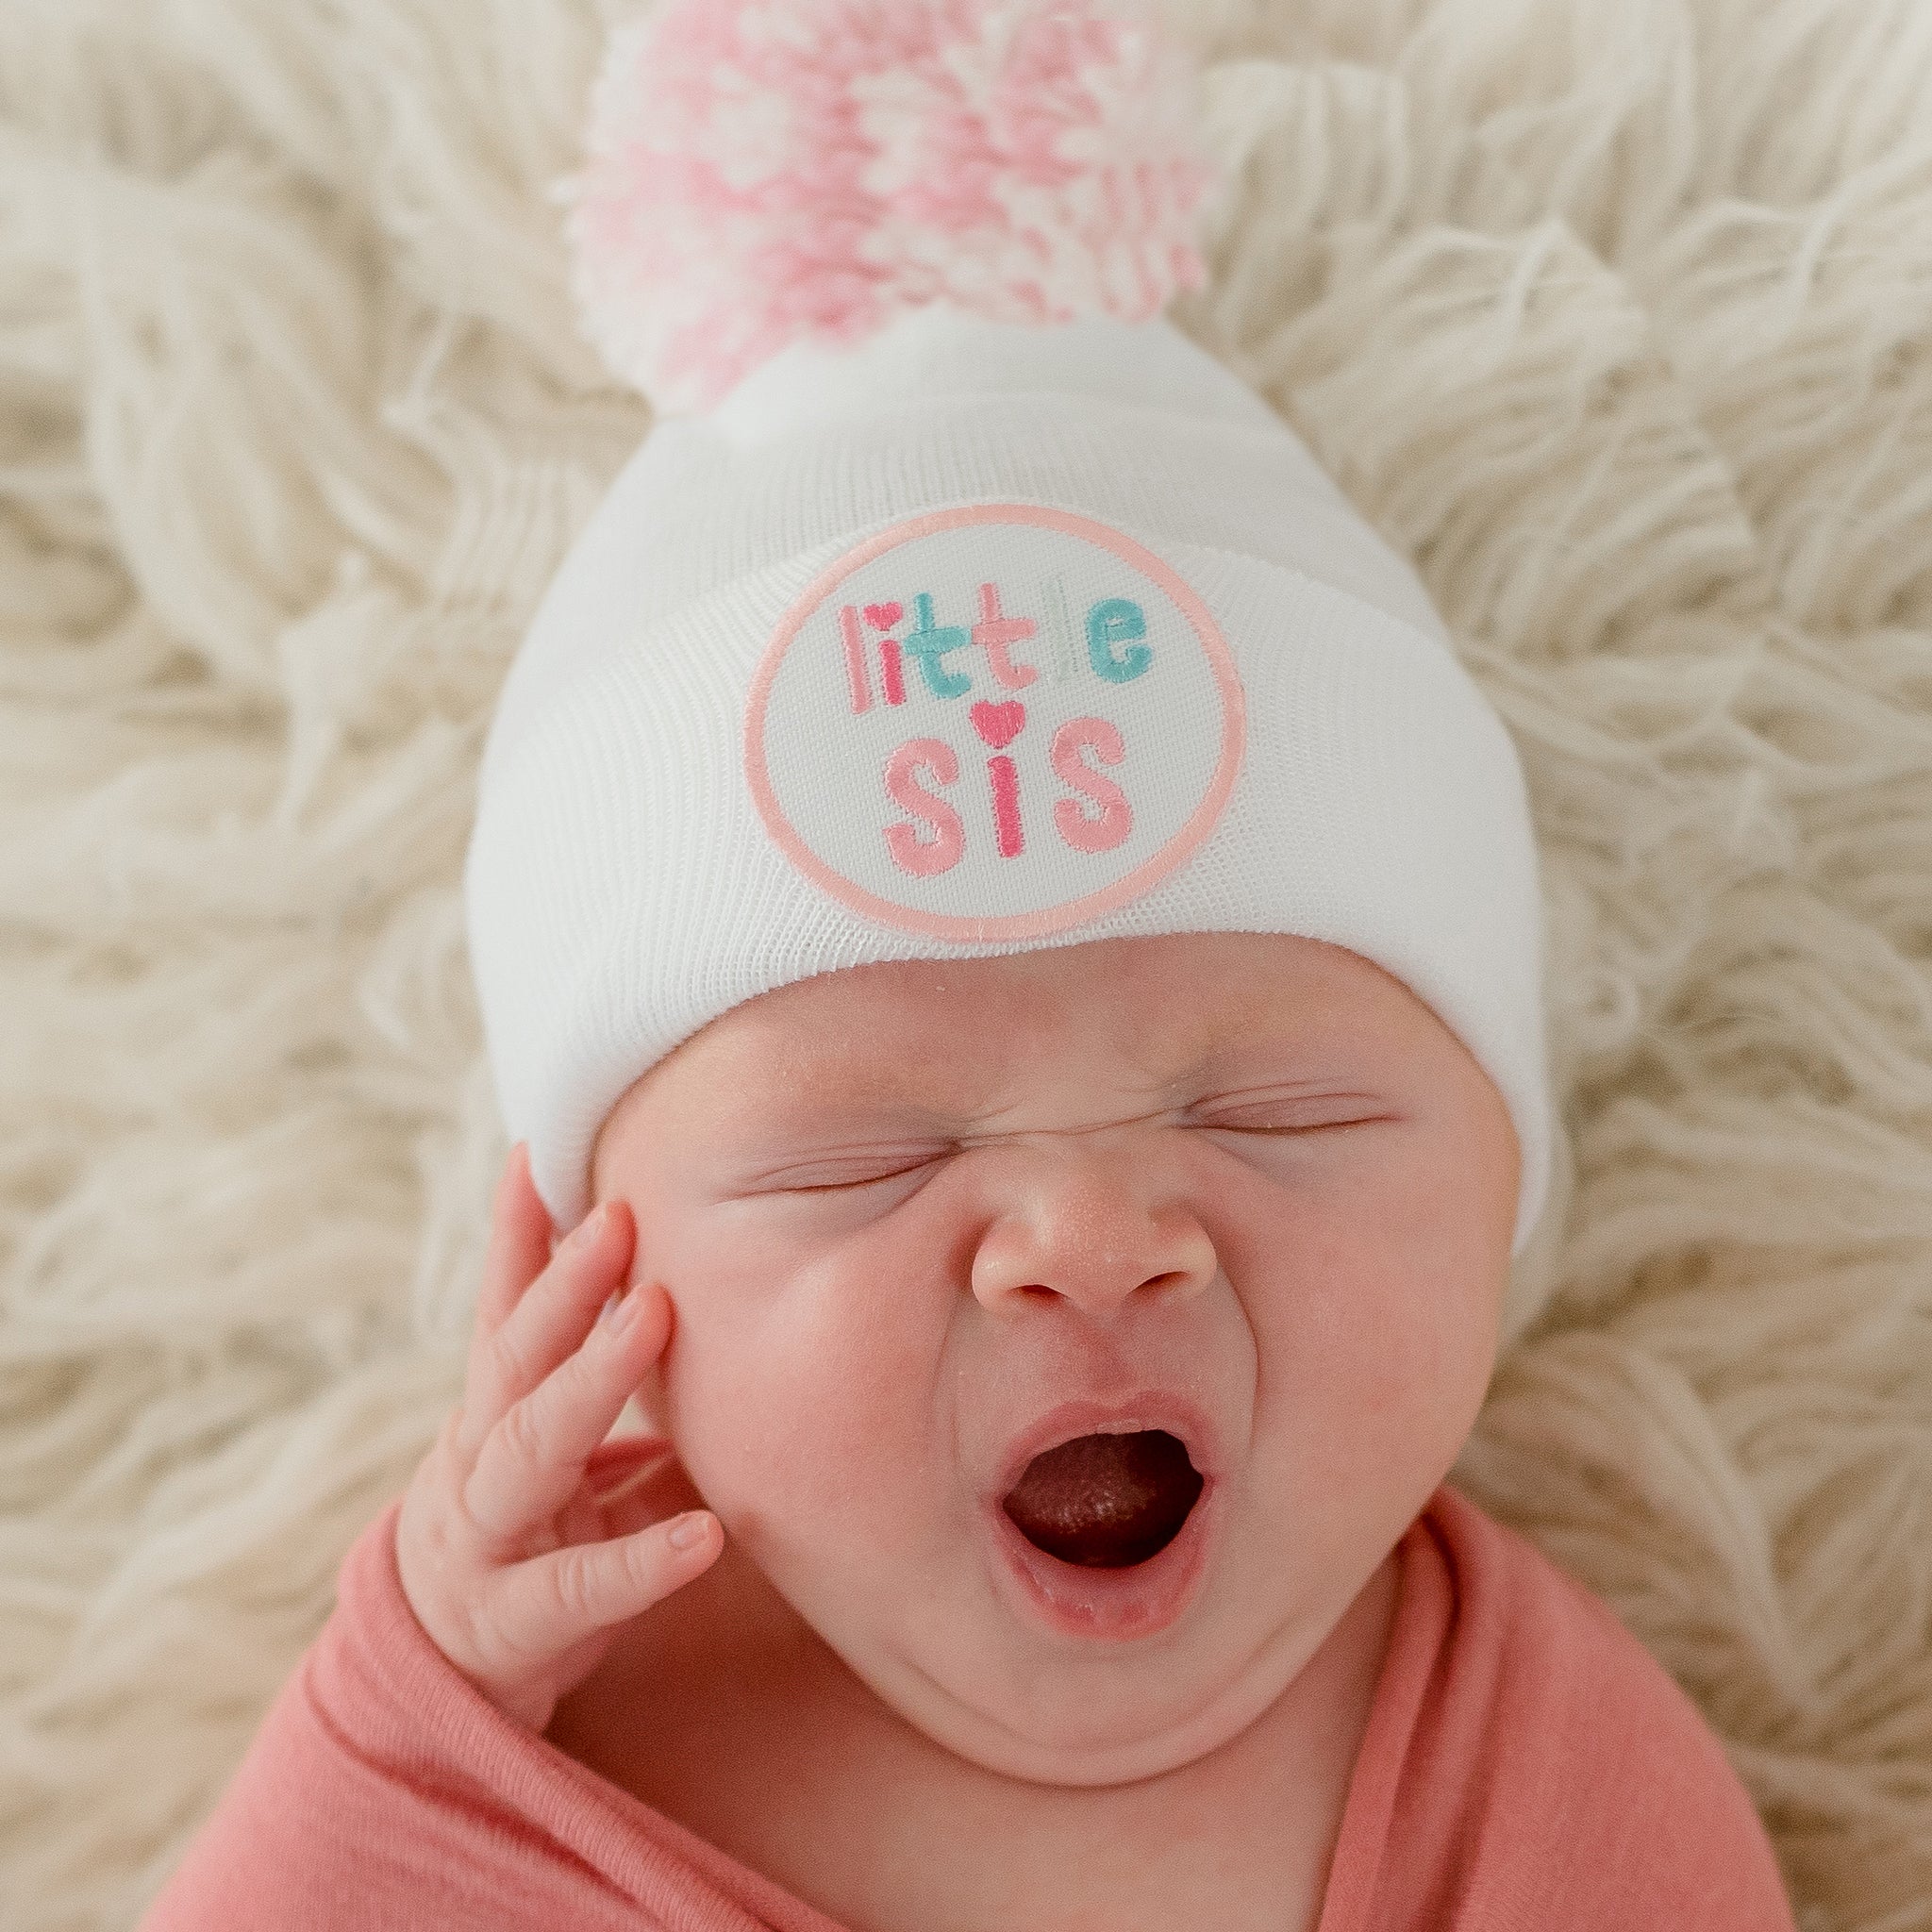 ilybean Little Sis with White Pom Pom Newborn Girl Hospital Hat - White, Pink and Striped Hat